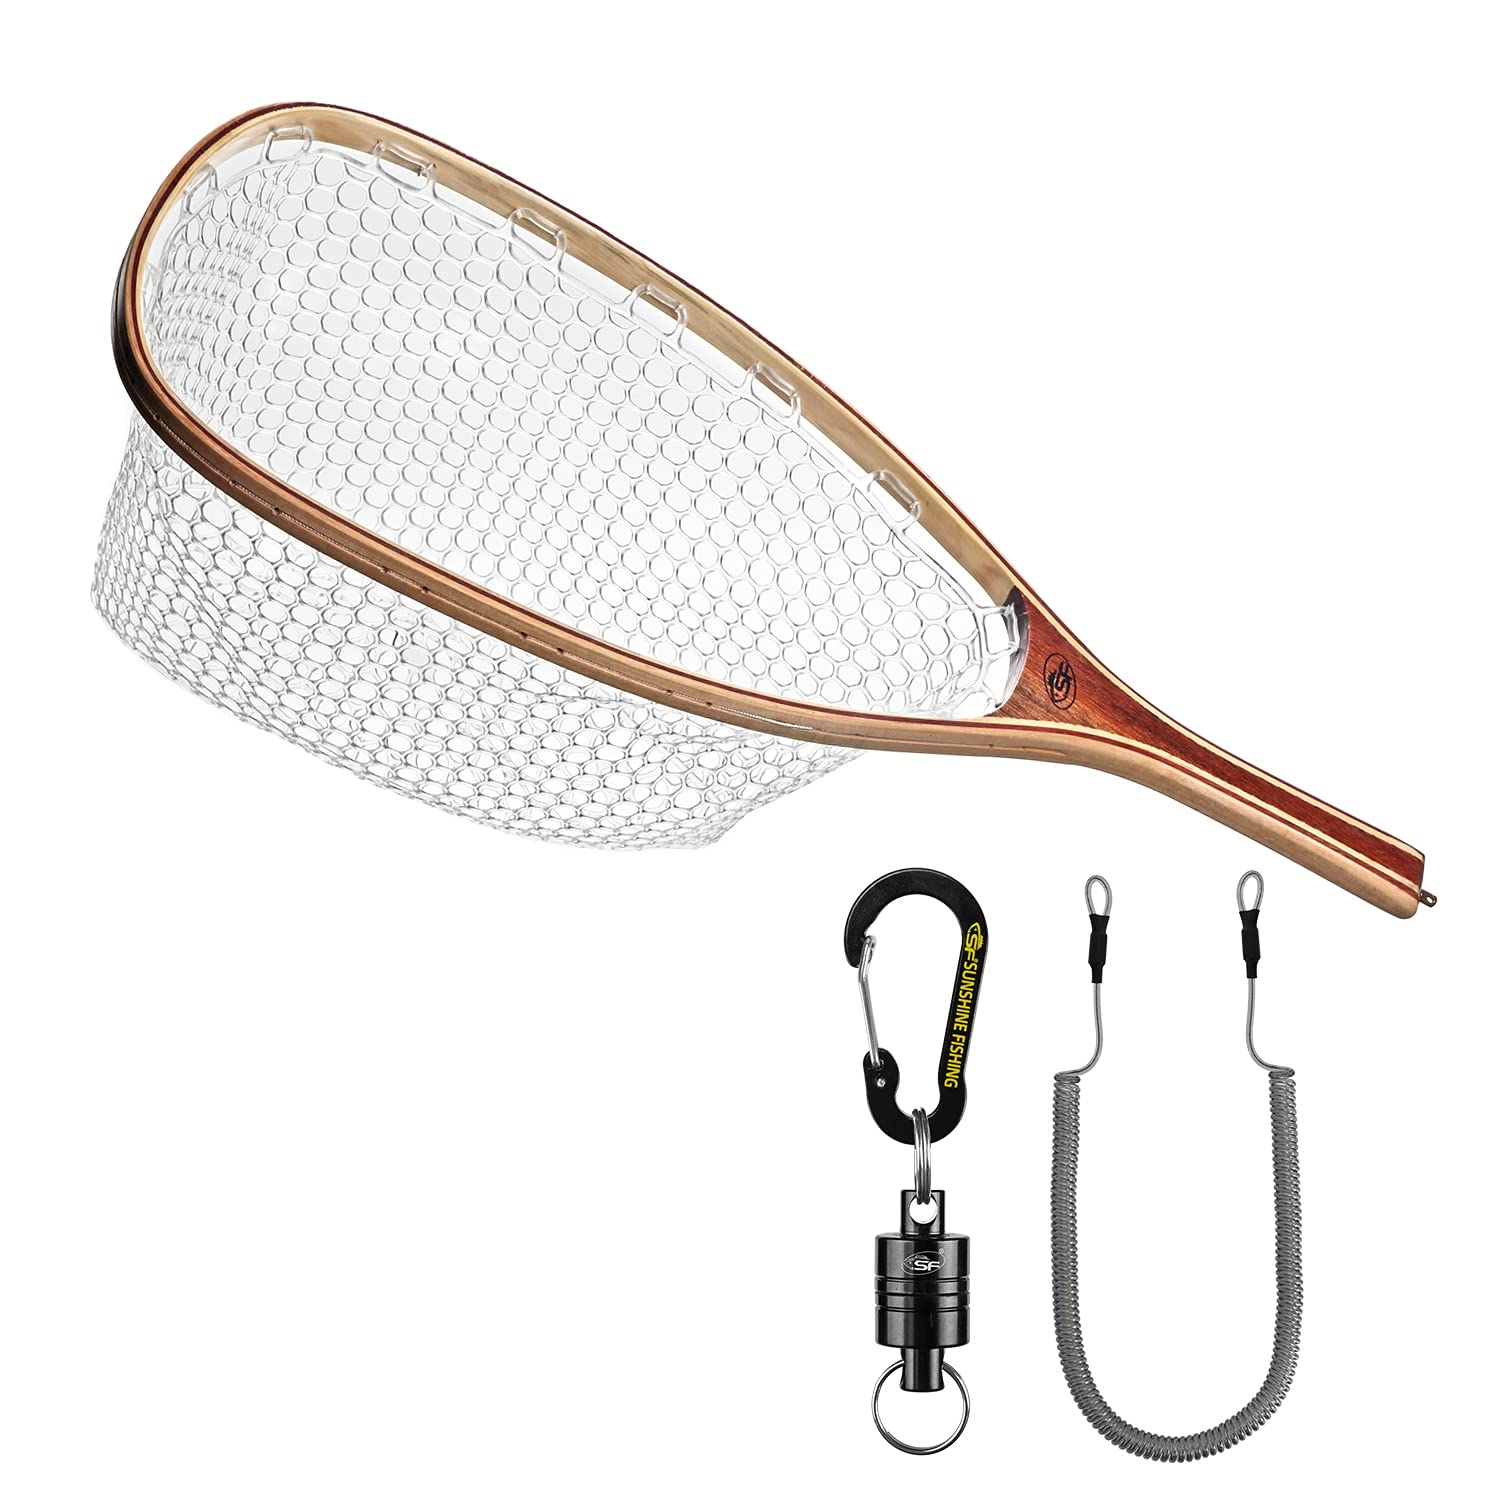 Gibbs Small Mesh 30 HANDLE Catch & Release net in Canada - Tyee Marine  Campbell River, Vancouver Island, BC, Canada